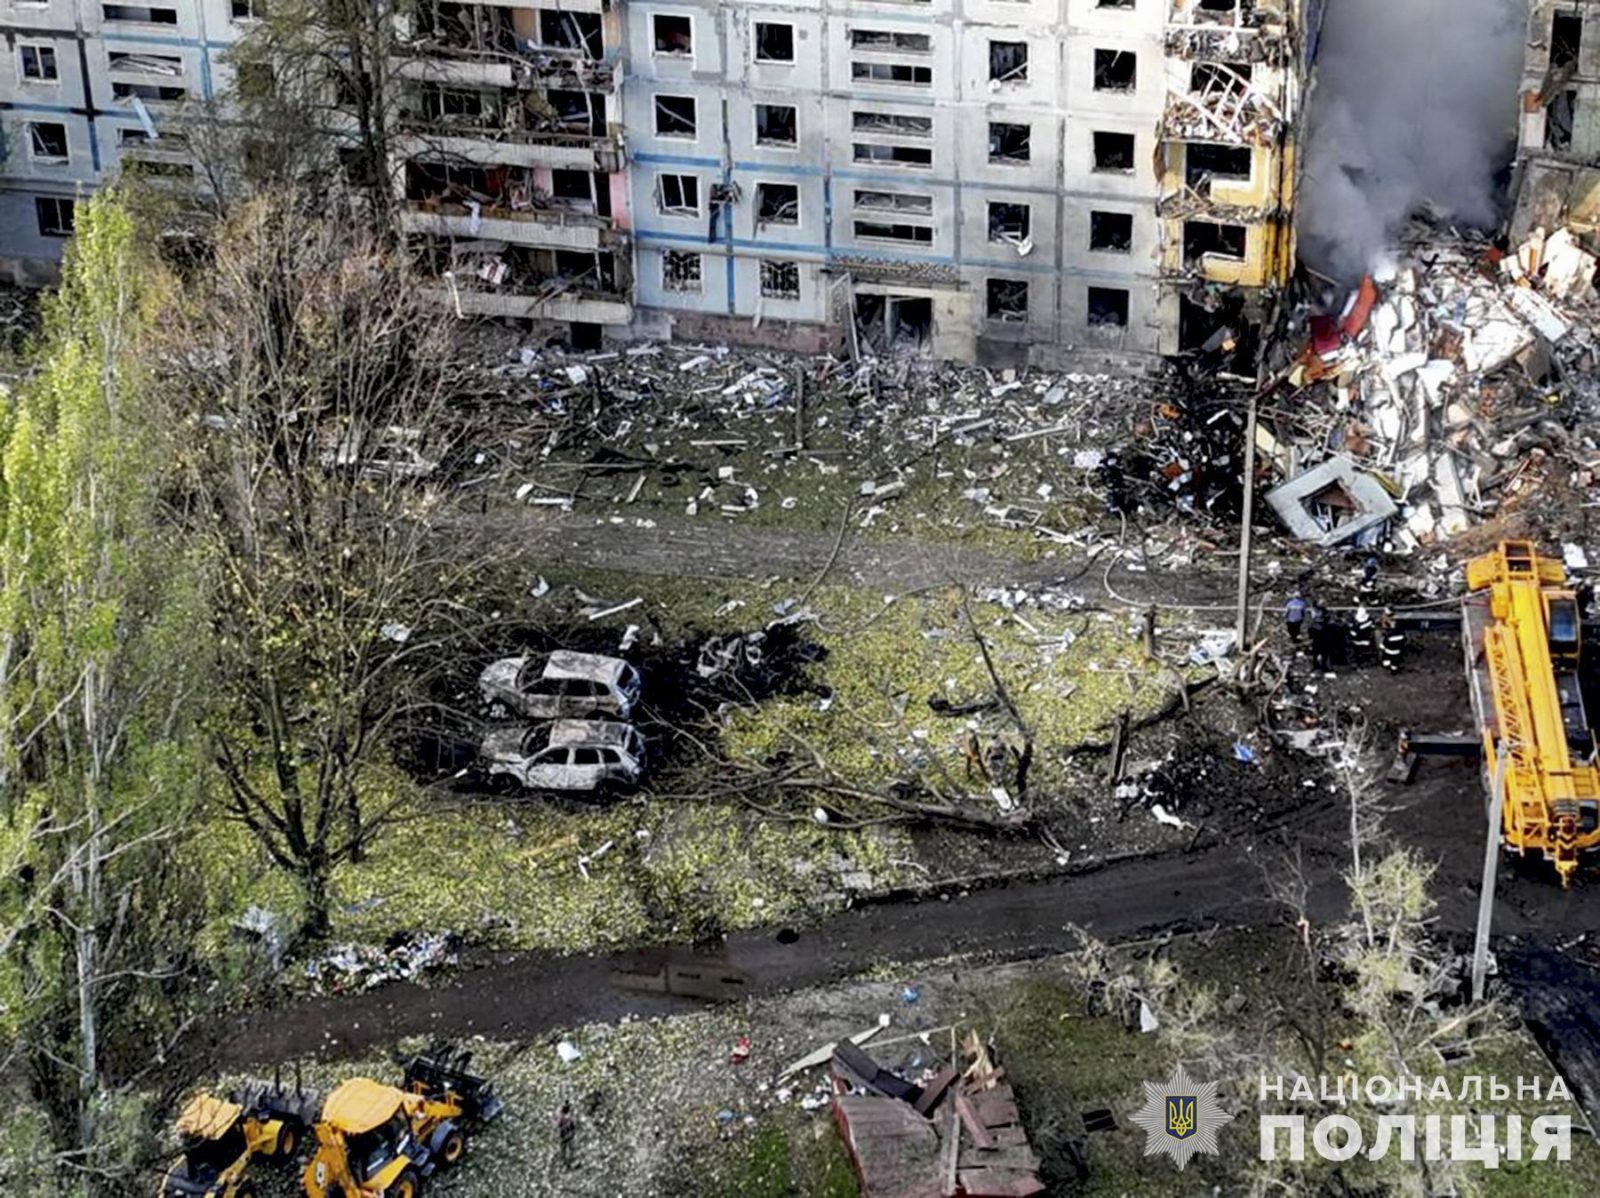 epa10232719 A handout photo made available by the National Police press service shows Ukrainian rescuers work at the site of a private building in the aftermath of a shelling in Zaporizhzhia, Ukraine, 09 October 2022. At least 17 persons were killed and 49 injured as Anatoly Kurtev, Secretary of the Zaporizhzhia City Council said. A 9-storey building and five private houses were partially destroyed. More than 50 high-rise buildings and 20 private sector buildings were damaged according to the Ukrainian Security Service. Russian troops entered Ukraine on 24 February 2022 starting a conflict that has provoked destruction and a humanitarian crisis.  EPA/UKRAINE NATIONAL POLICE HANDOUT  HANDOUT EDITORIAL USE ONLY/NO SALES